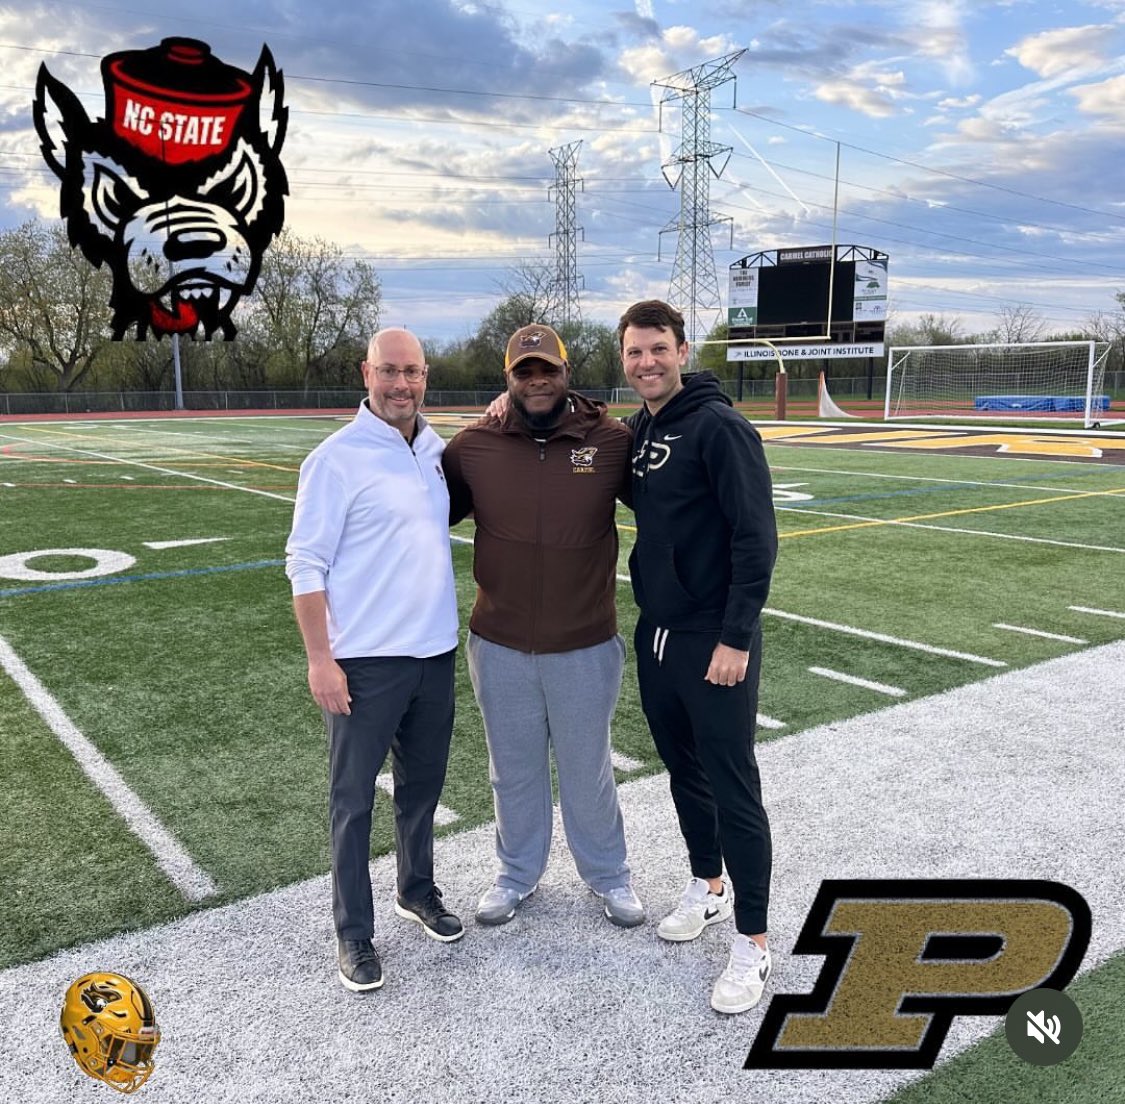 Thank you to @CoachKurtRoper @PackFootball and @GrahamHarrell6 @BoilerFootball for coming to @CorsairsFB it was a pleasure having you visit where I call home. See you both really soon. Appreciate you both! @PlayBookAthlete @QBHitList @AllenTrieu @SWiltfong_ @GregSmithRivals…